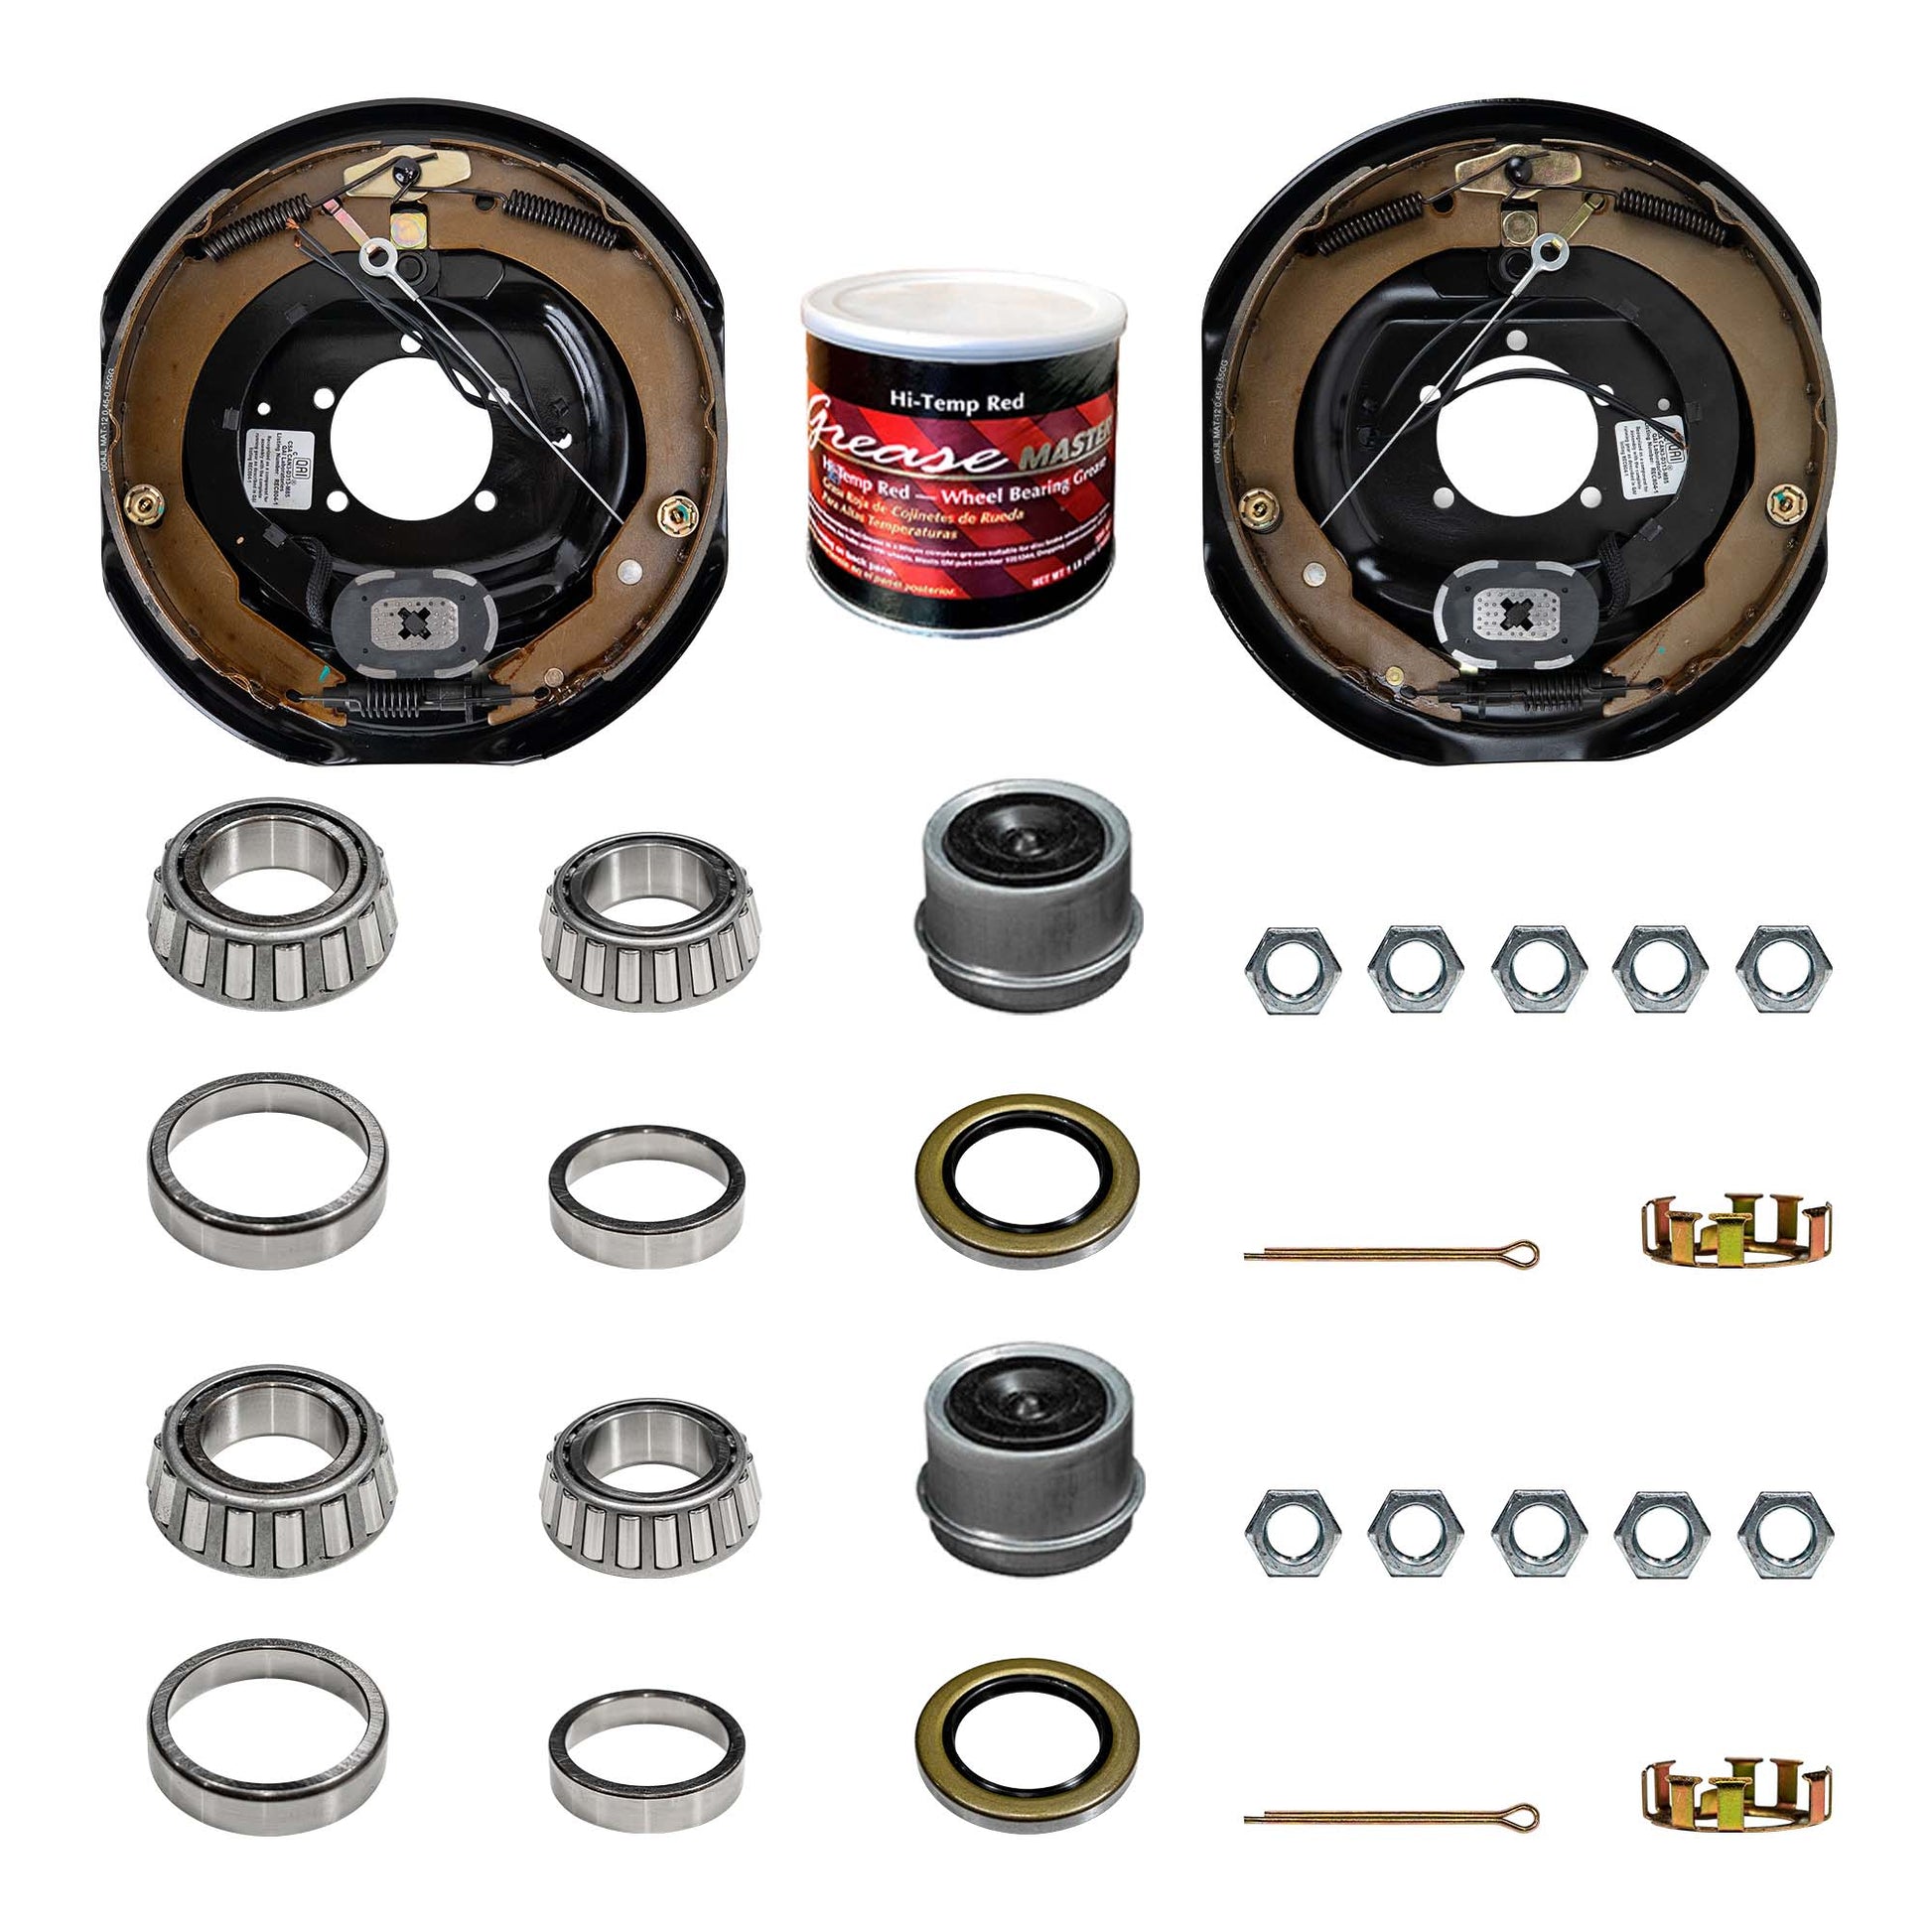 7k Trailer Axle Brake Assembly - 7000 lb - 12"x2" - Right Hand (Passenger Side) - Dexter Compatible - The Trailer Parts Outlet